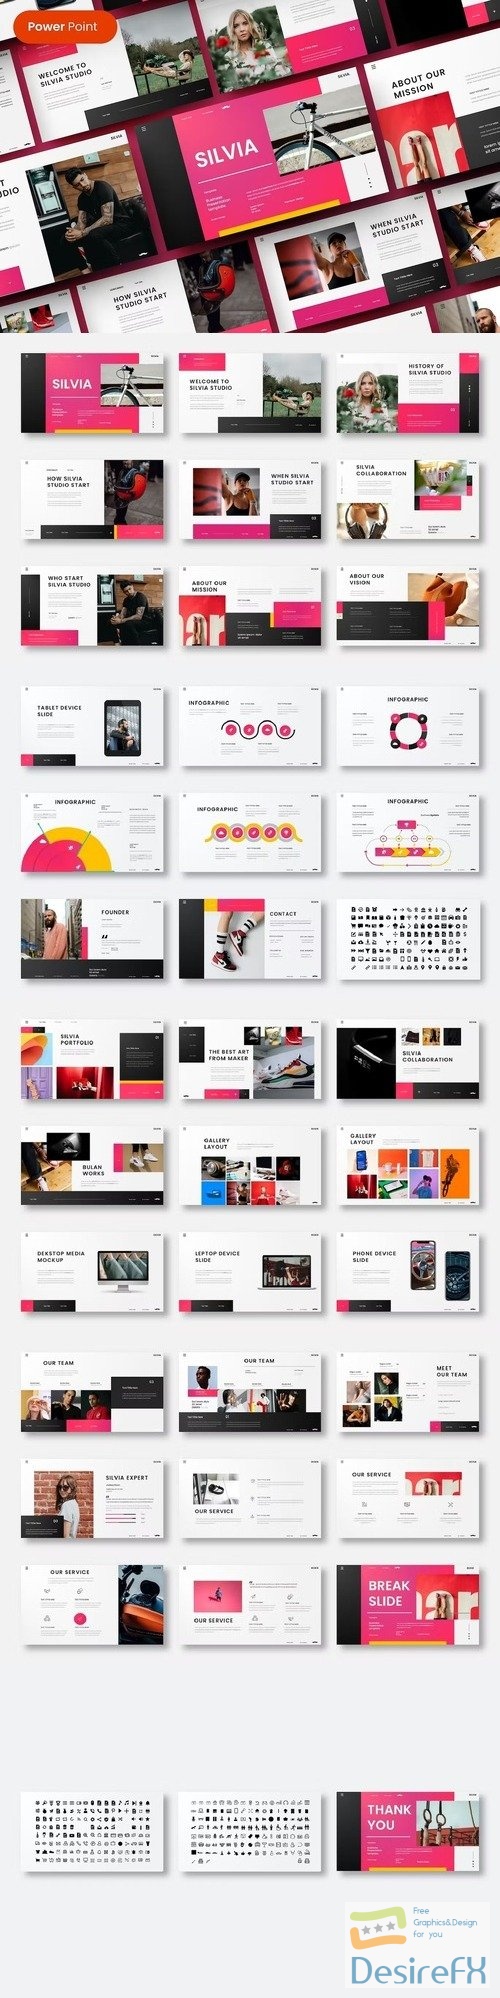 Silvia - Business PowerPoint Template 377SDPW